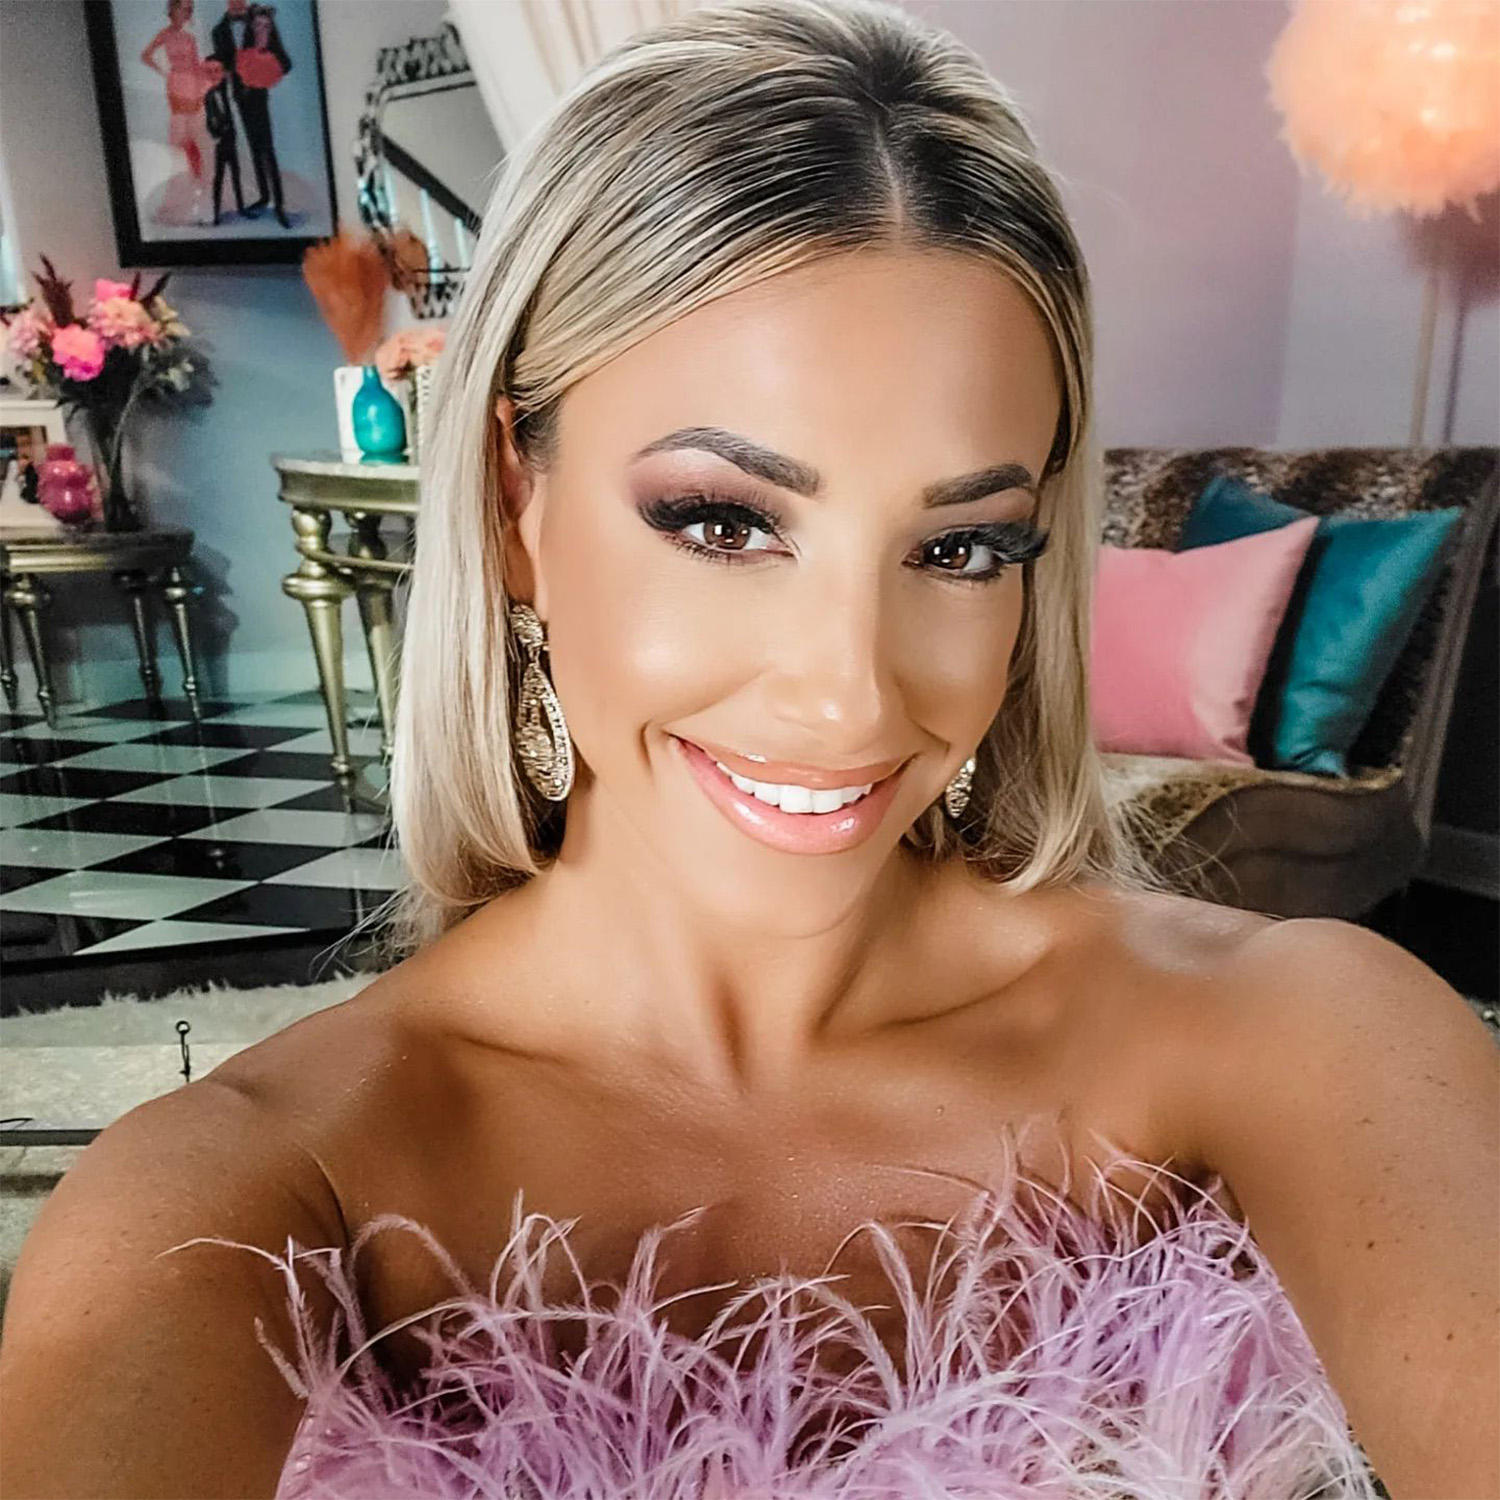 Who Is Danielle Cabral? What to Know About the RHONJ Star pic